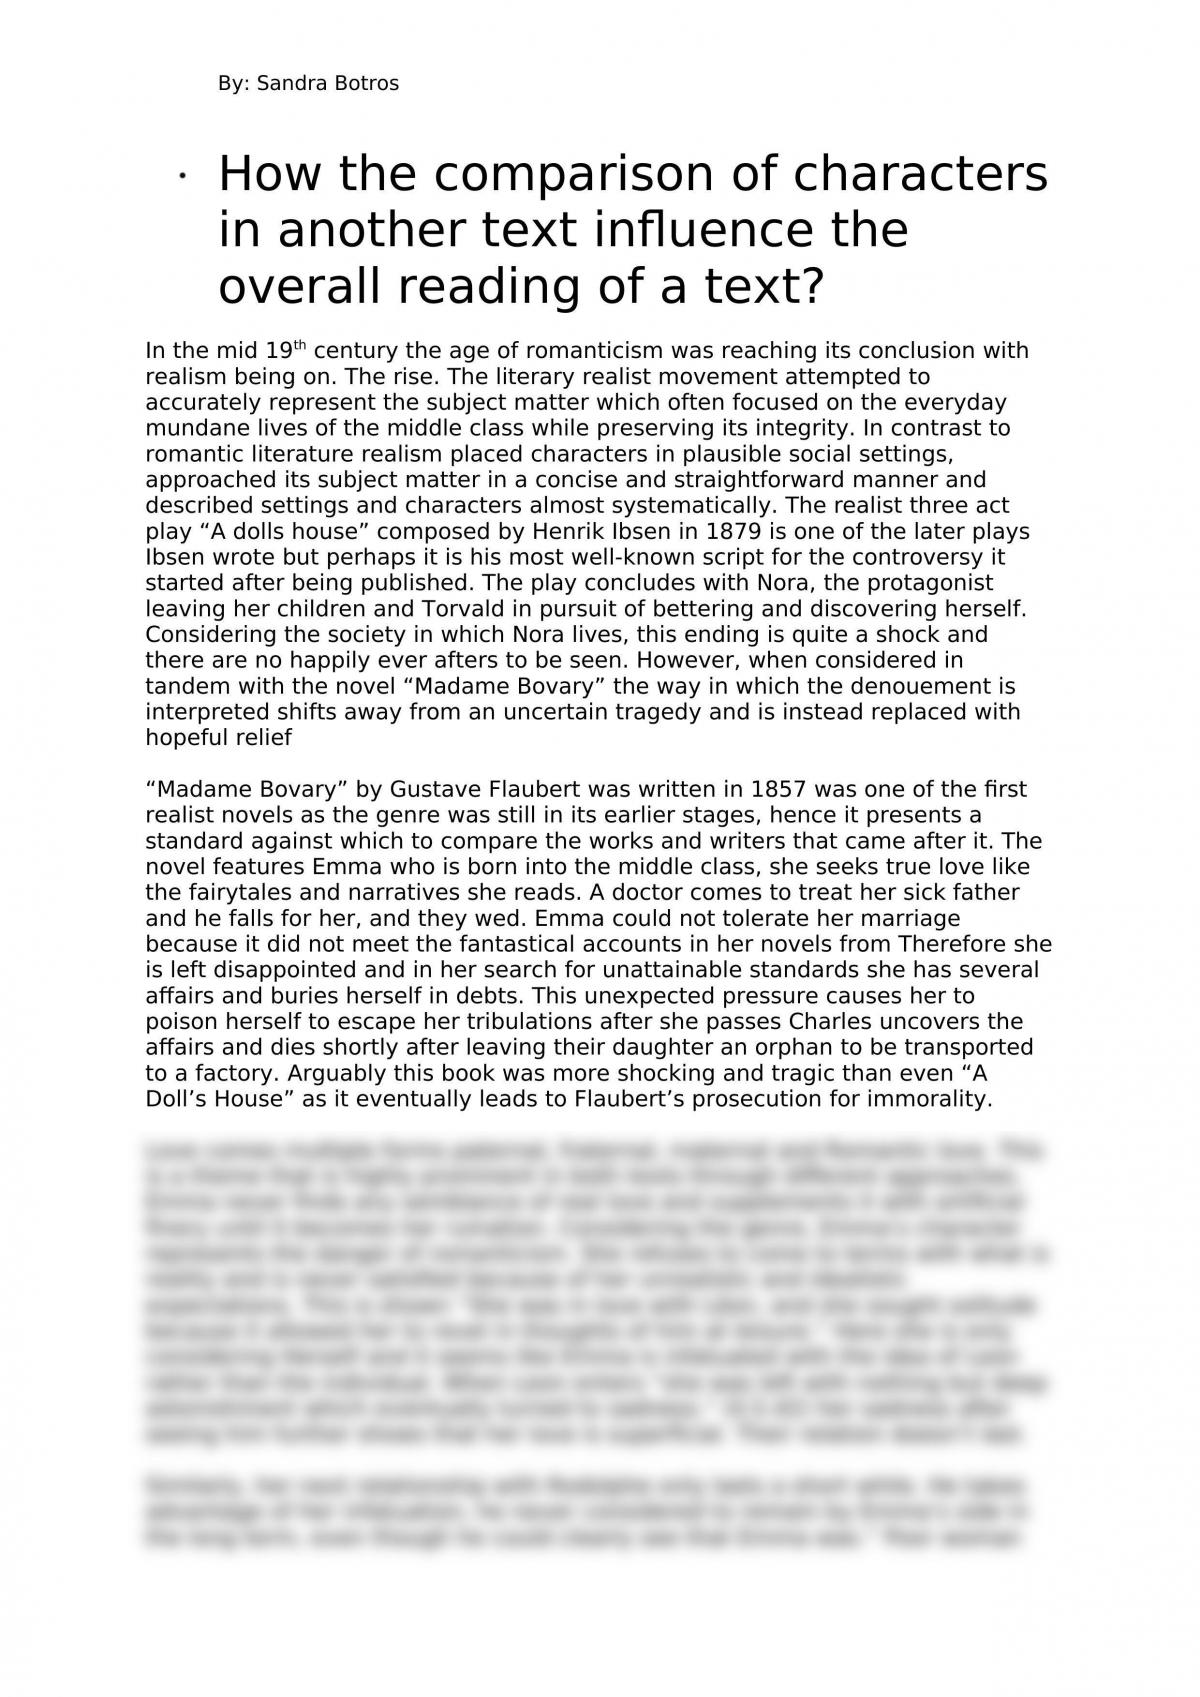 Madame Bovary and A Dolls House Essay  - Page 1